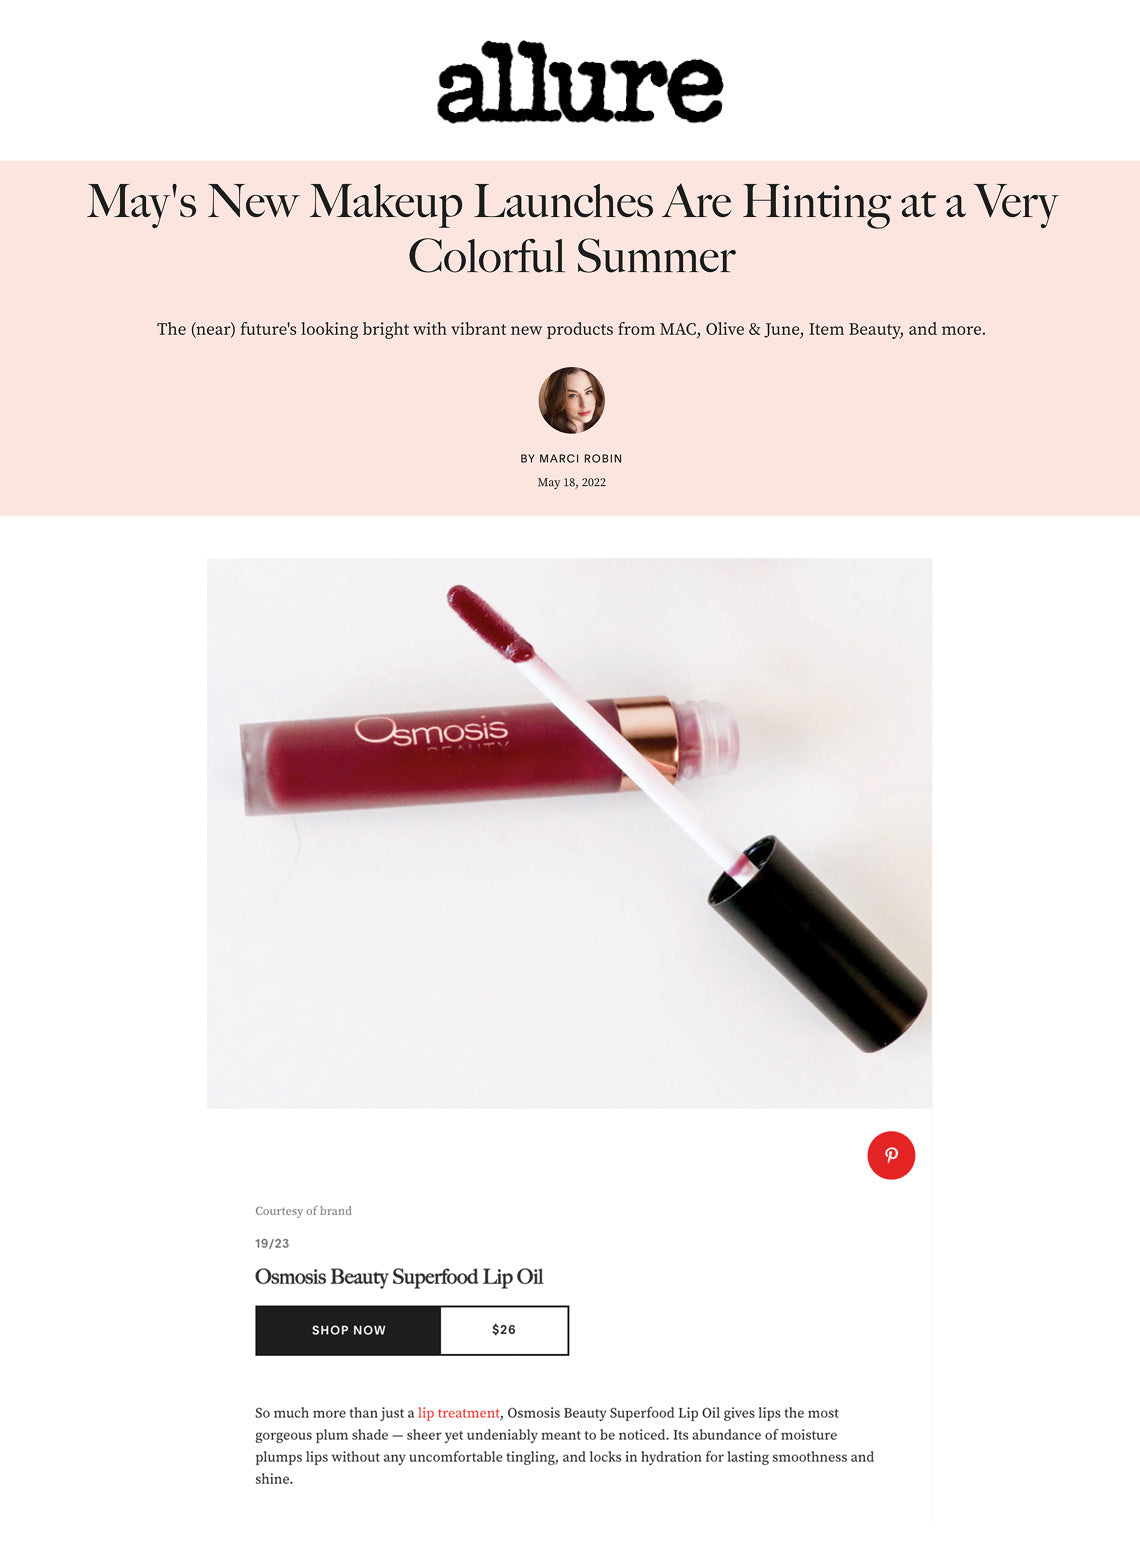 Allure Features Superfood Lip Oil